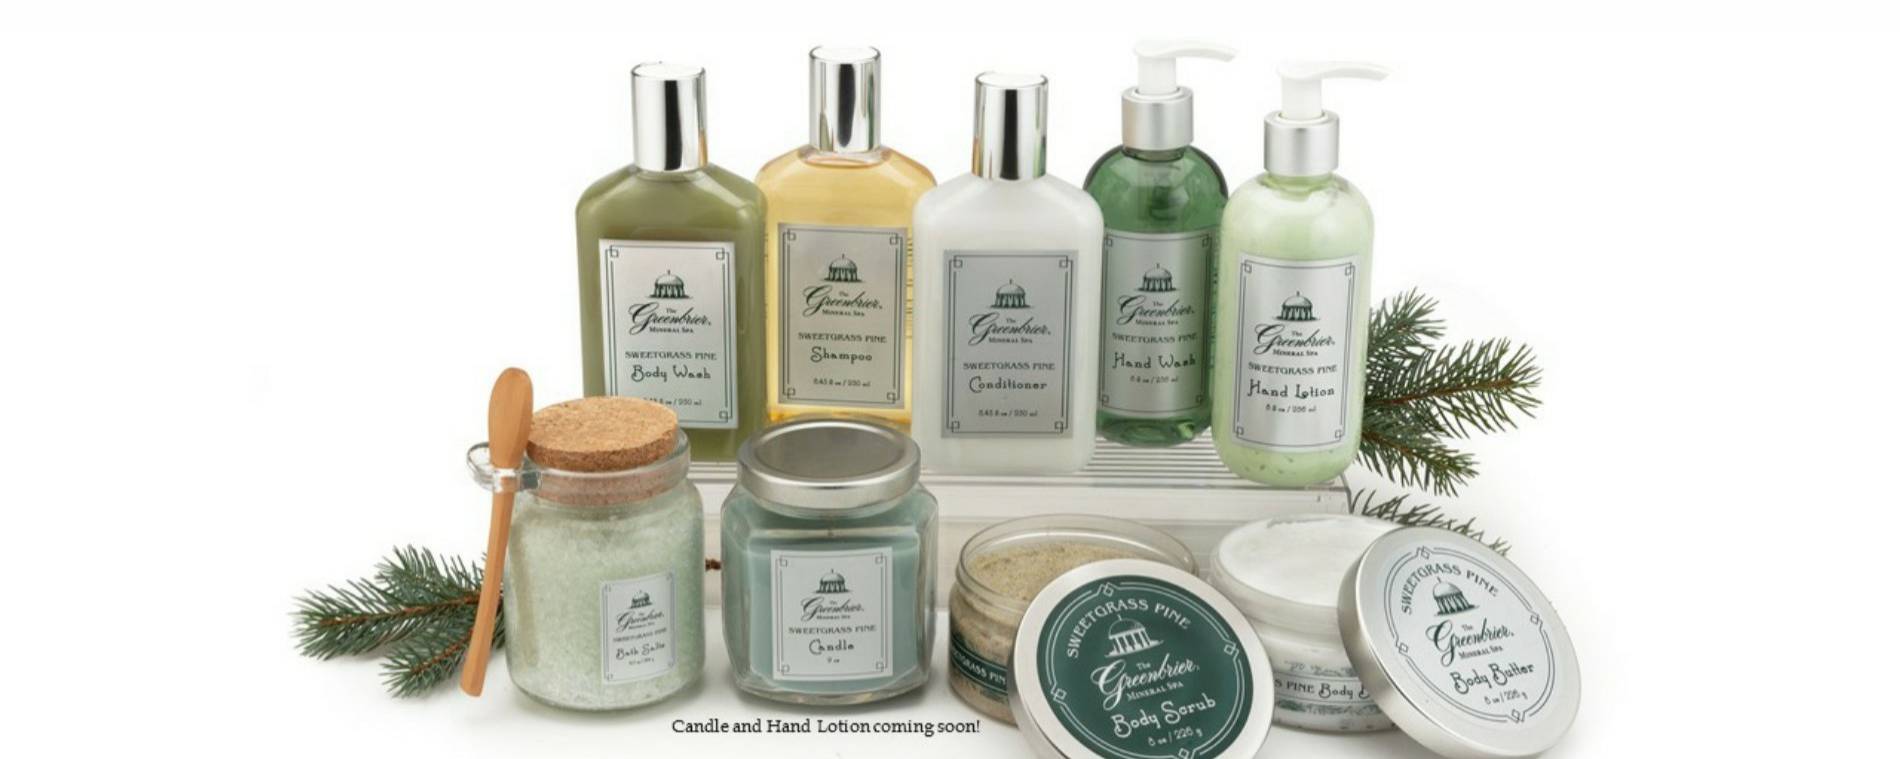 /the-greenbrier-bath-collection/bath-body-gift-sets?product_list_limit=36